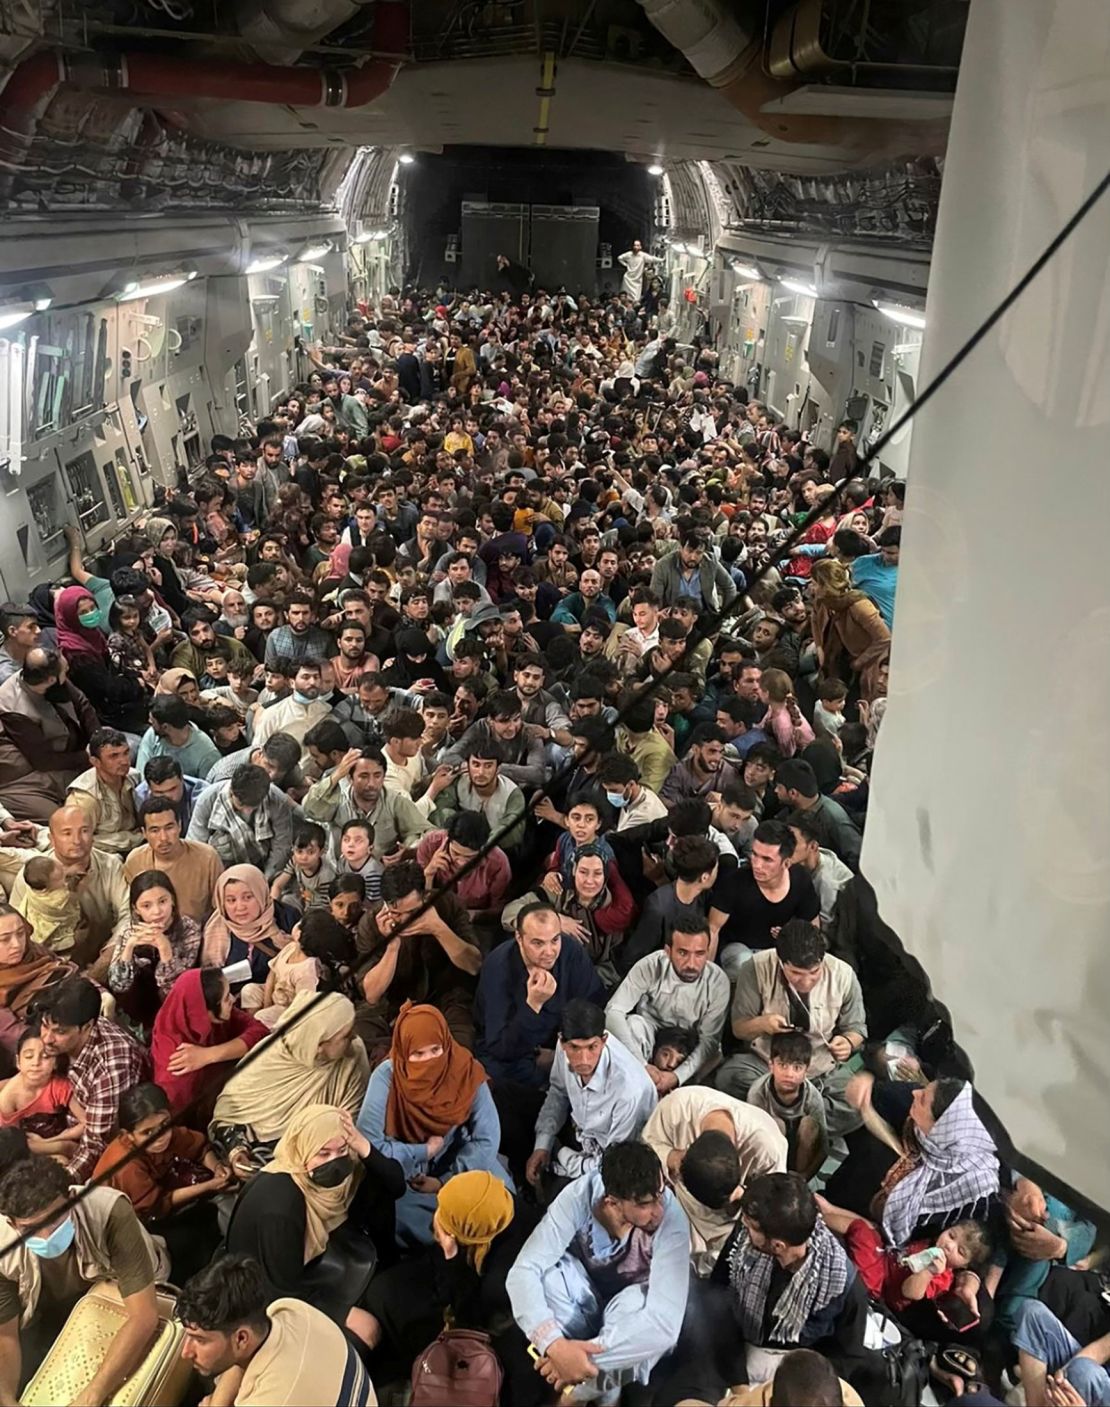 Evacuees crowd the interior of a US Air Force C-17 Globemaster III transport aircraft on a flight to Qatar from Kabul, Afghanistan August 15, 2021. The Air Force said Friday that the plane carried a record 823 people.